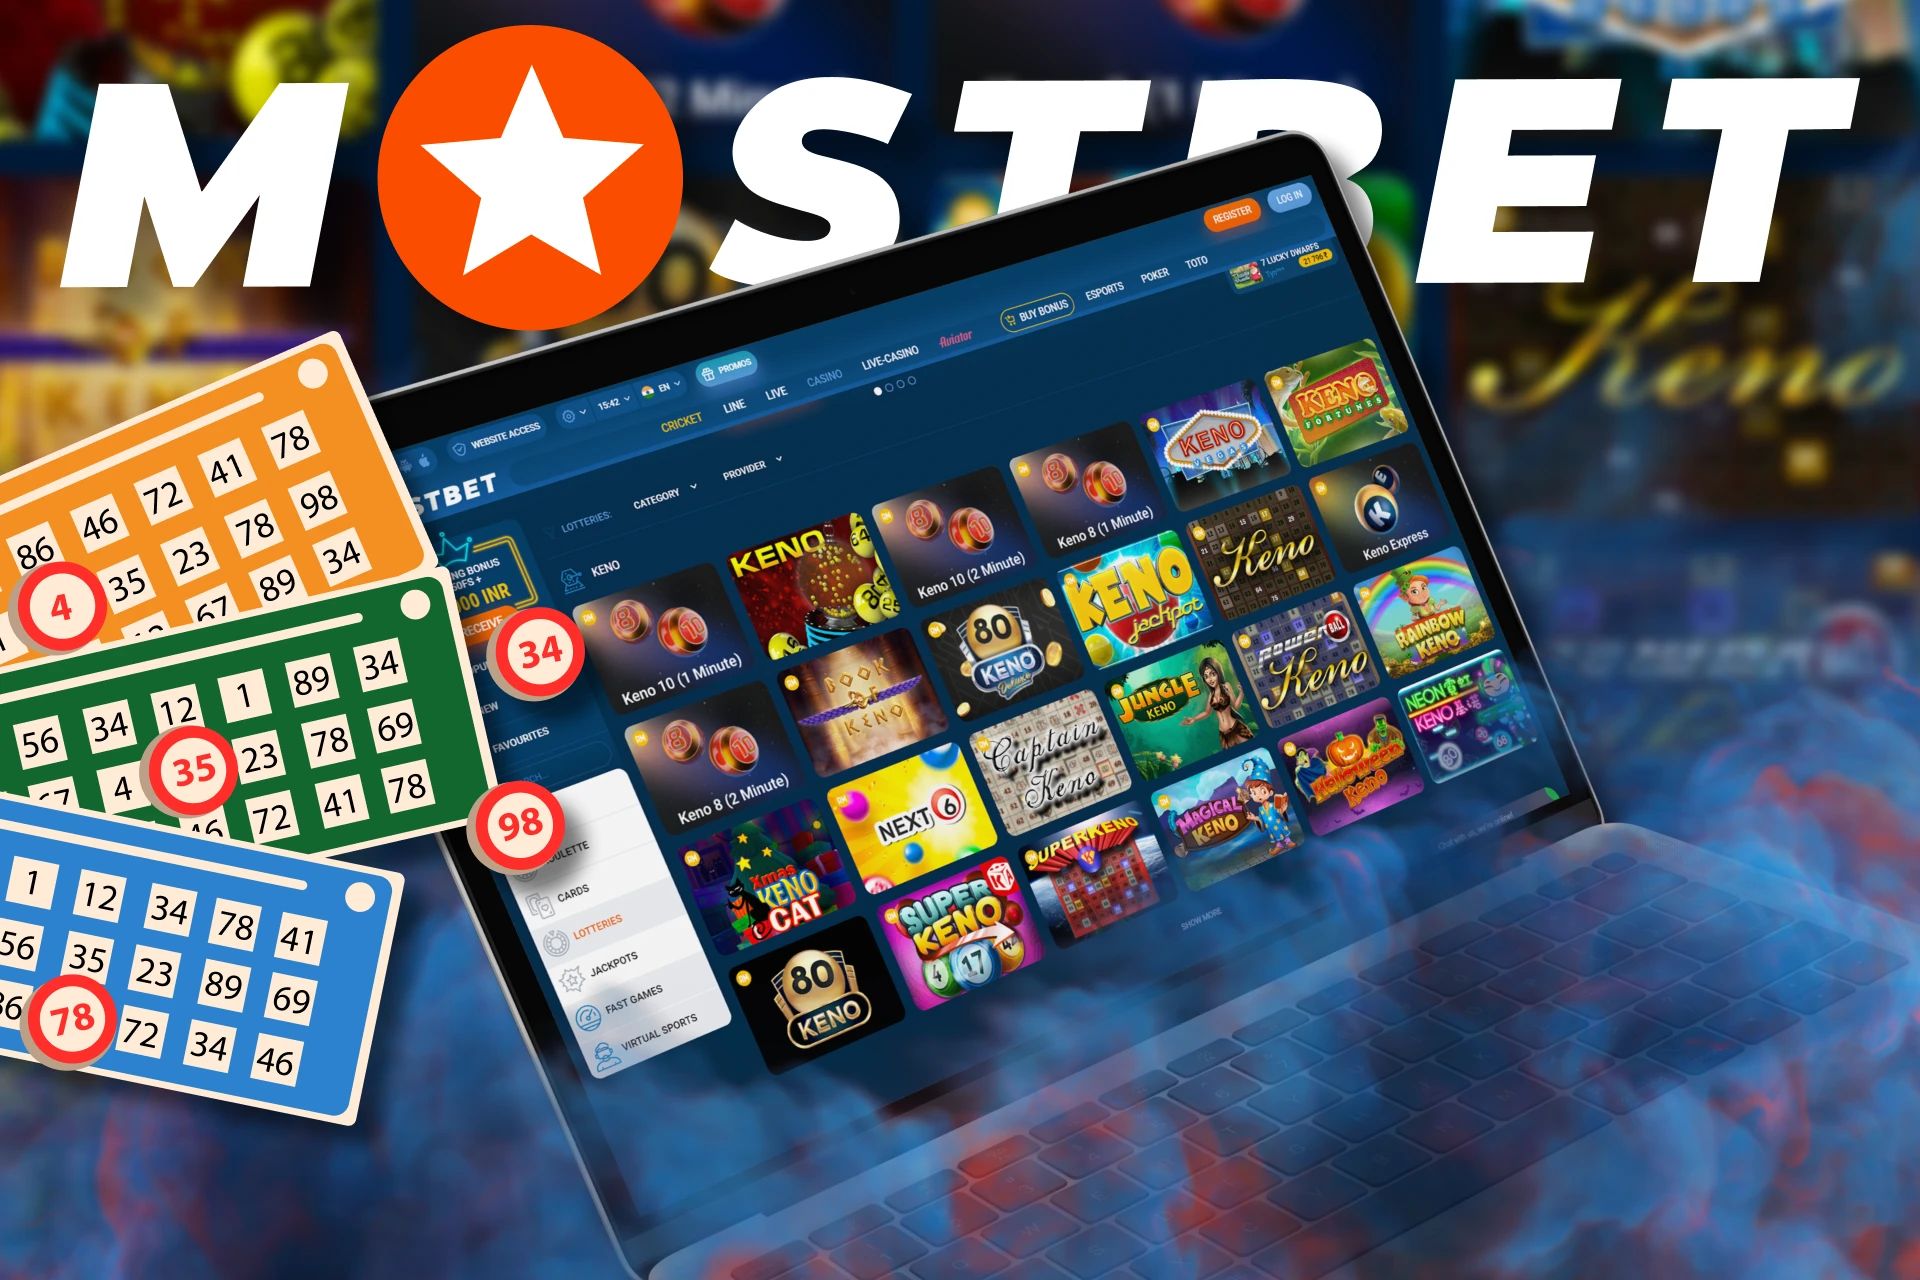 At Mostbet, you can play keno.